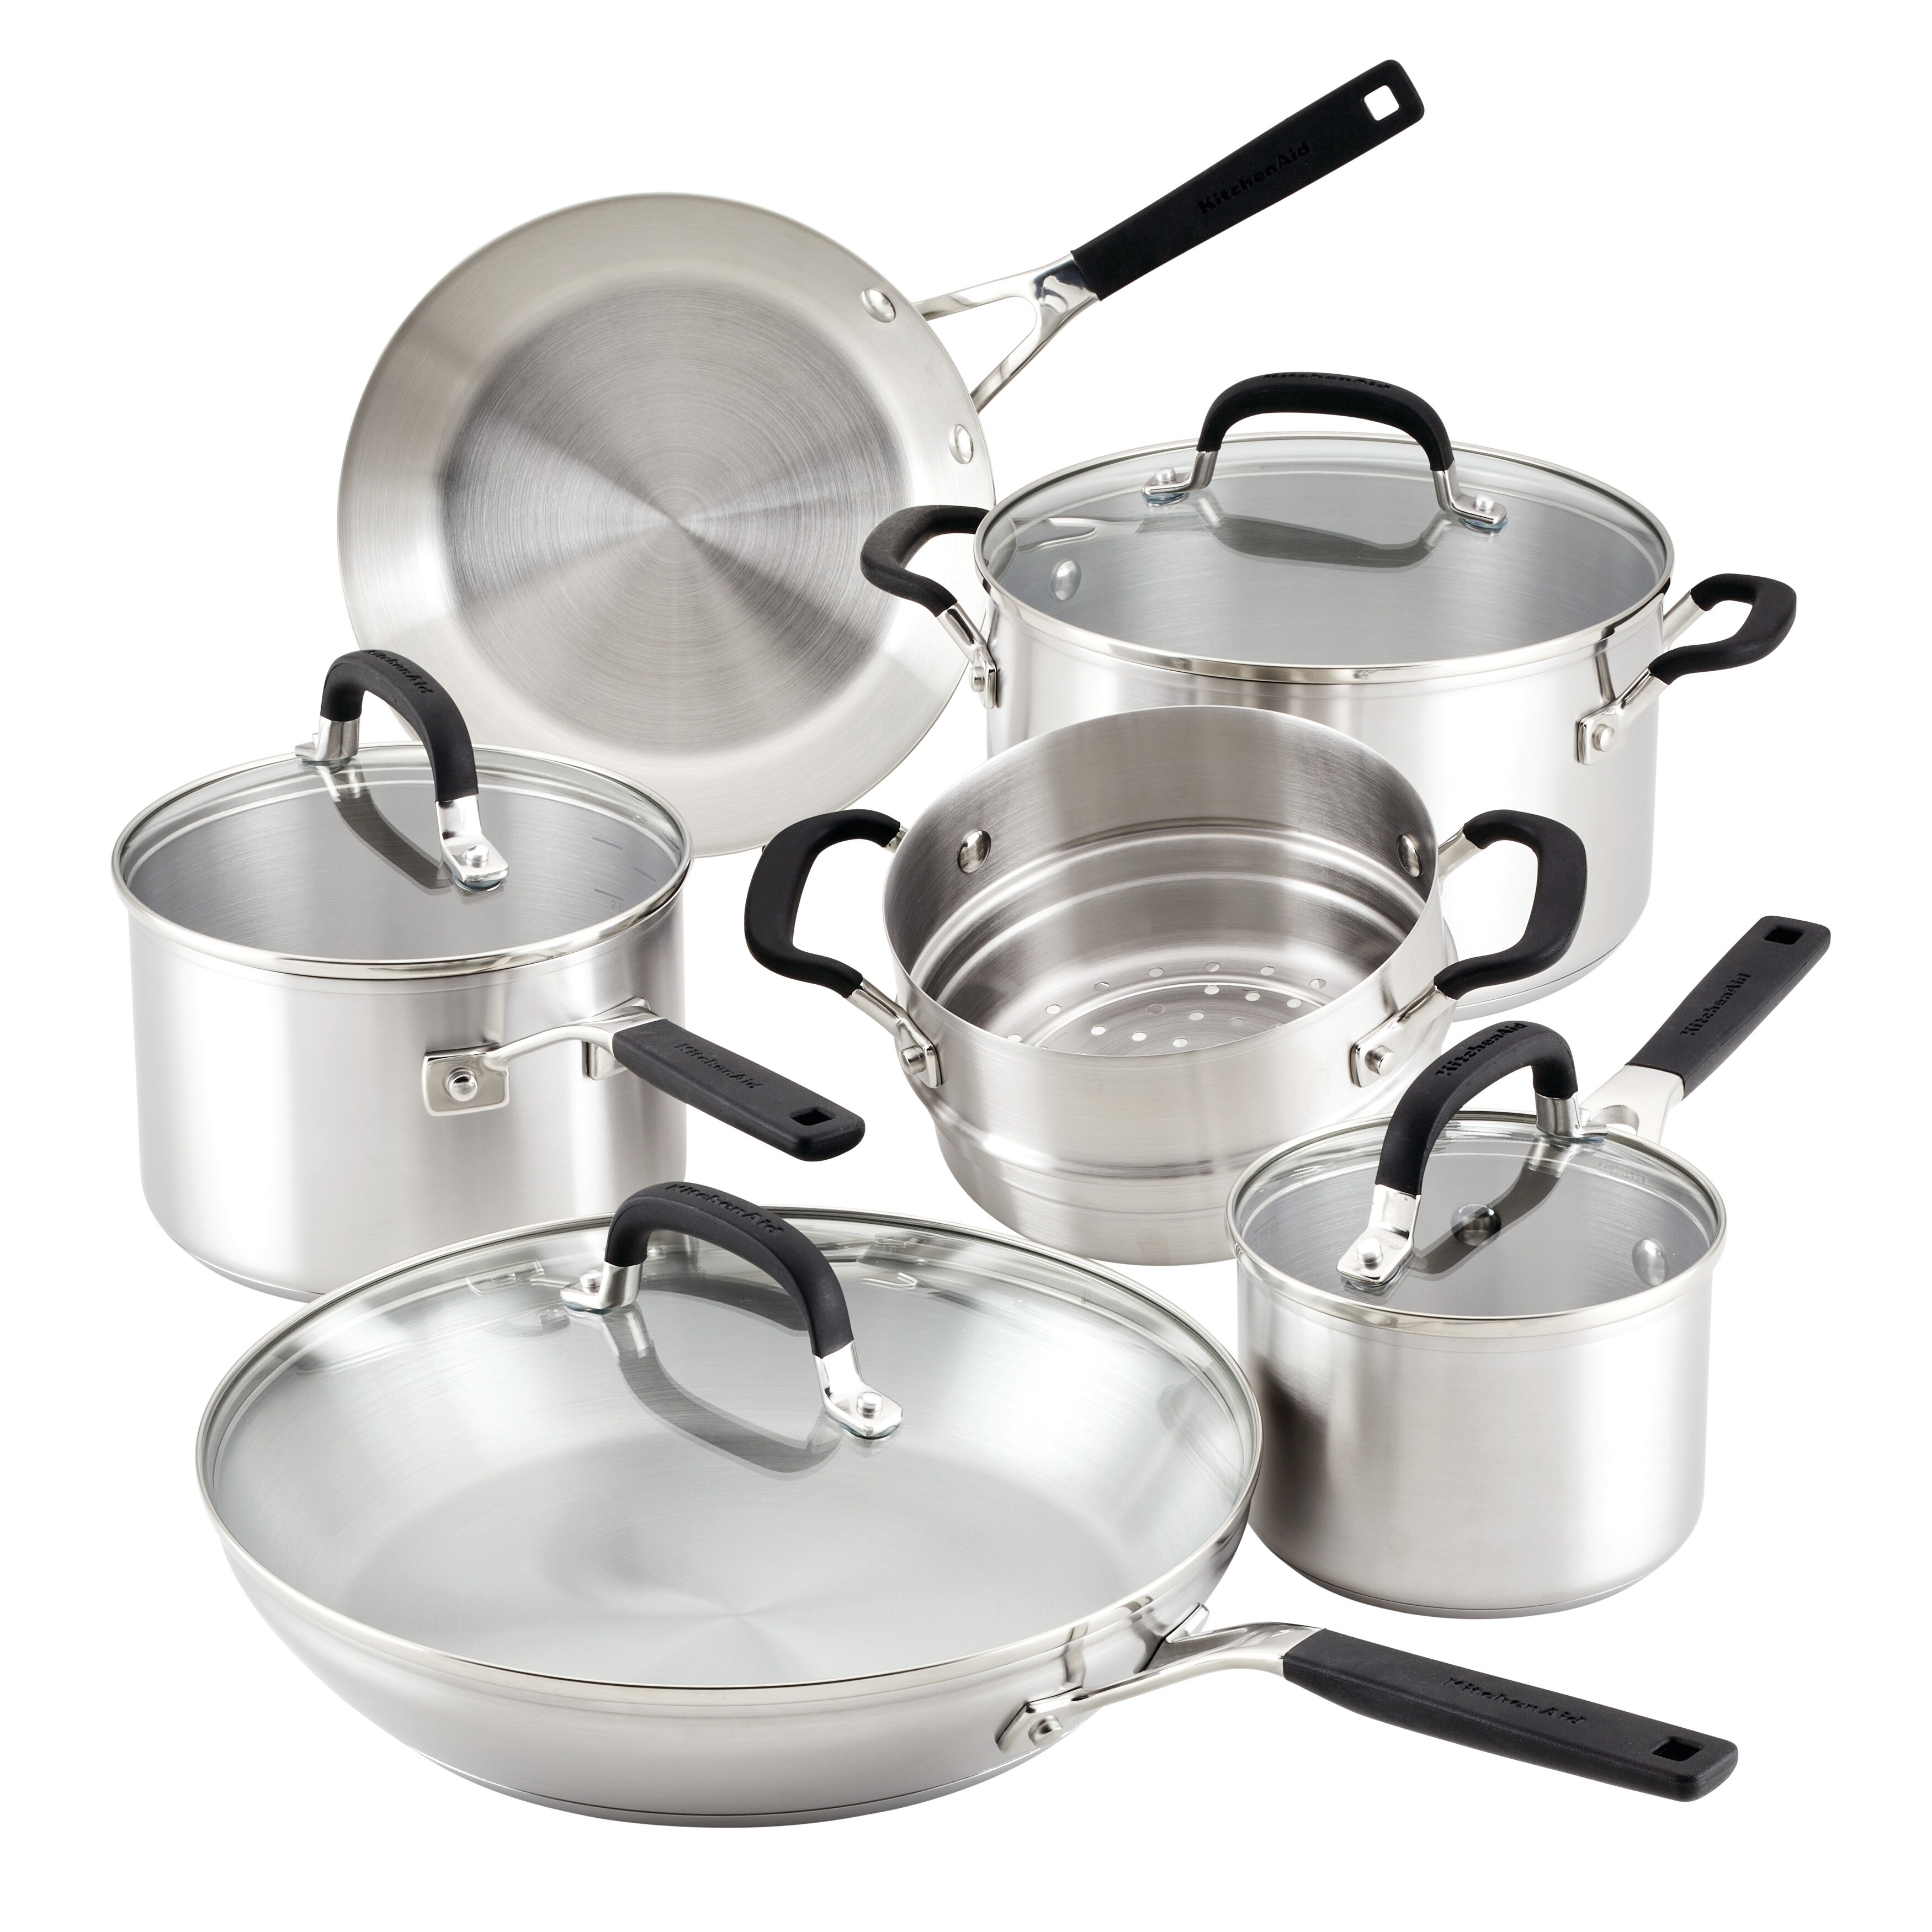 KitchenAid Stainless Steel Cookware Induction Pots and Pans Set